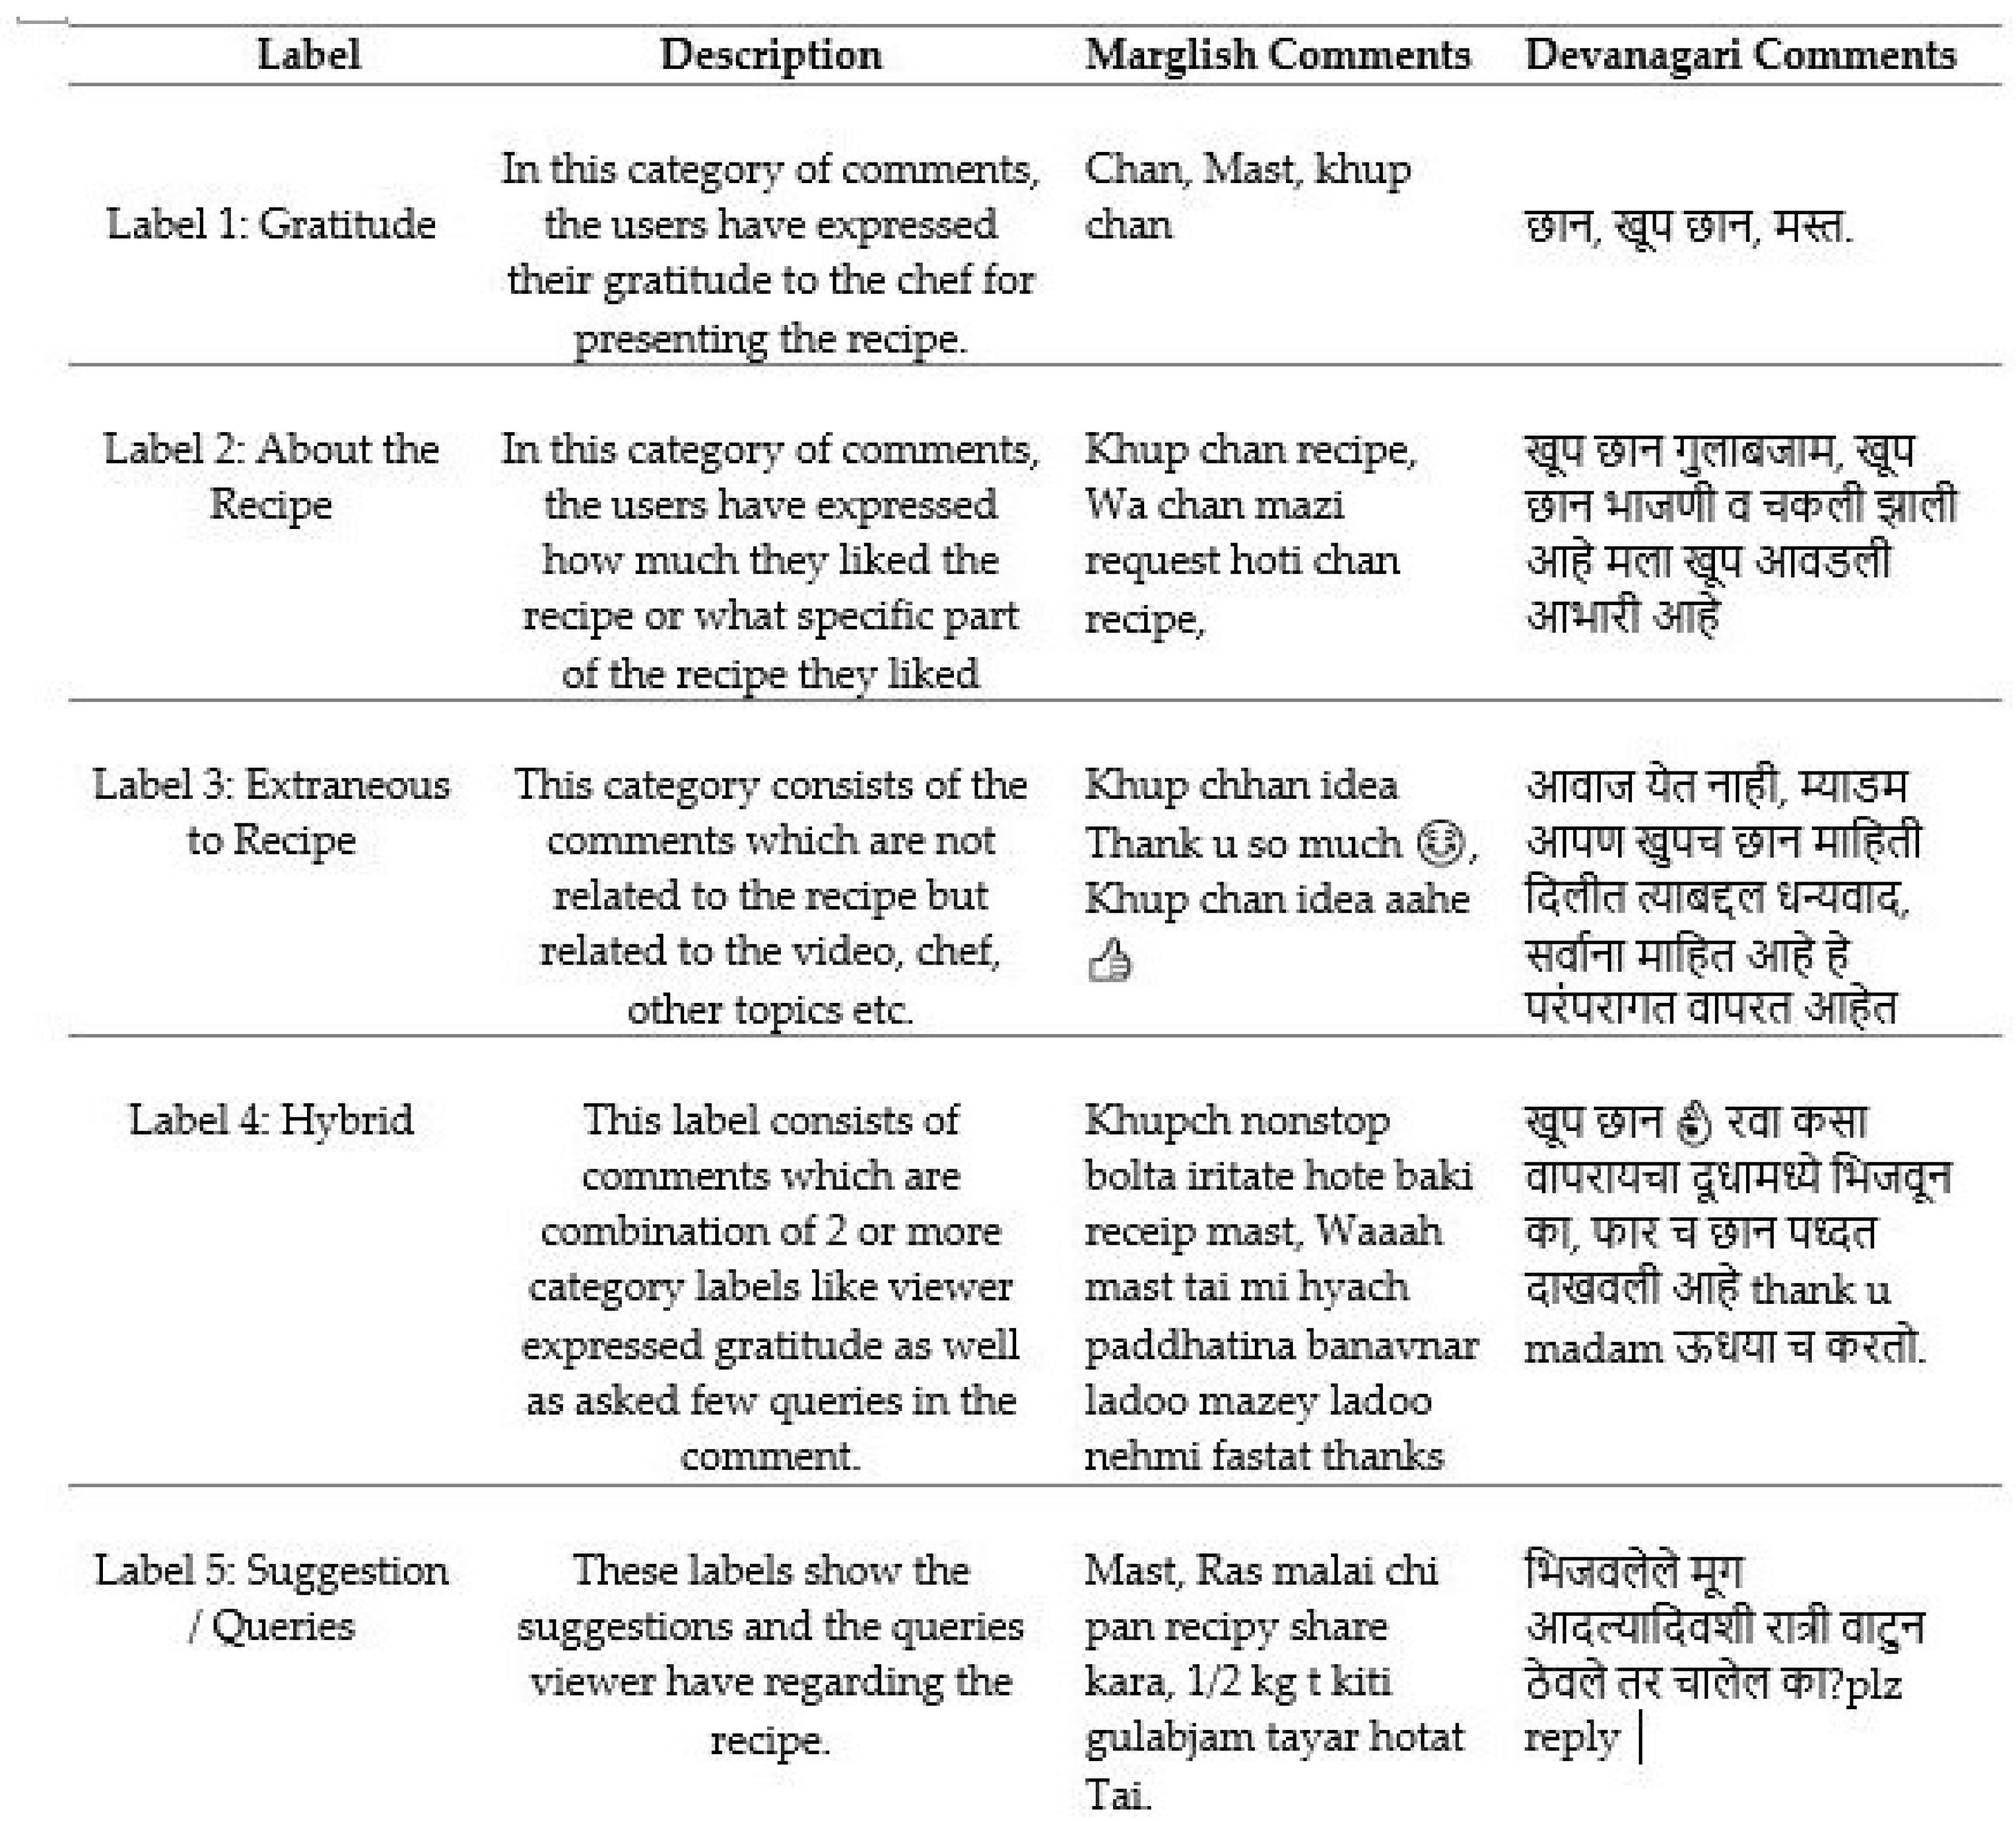 Bdcc Free Full Text Opinion Mining On Marglish And Devanagari